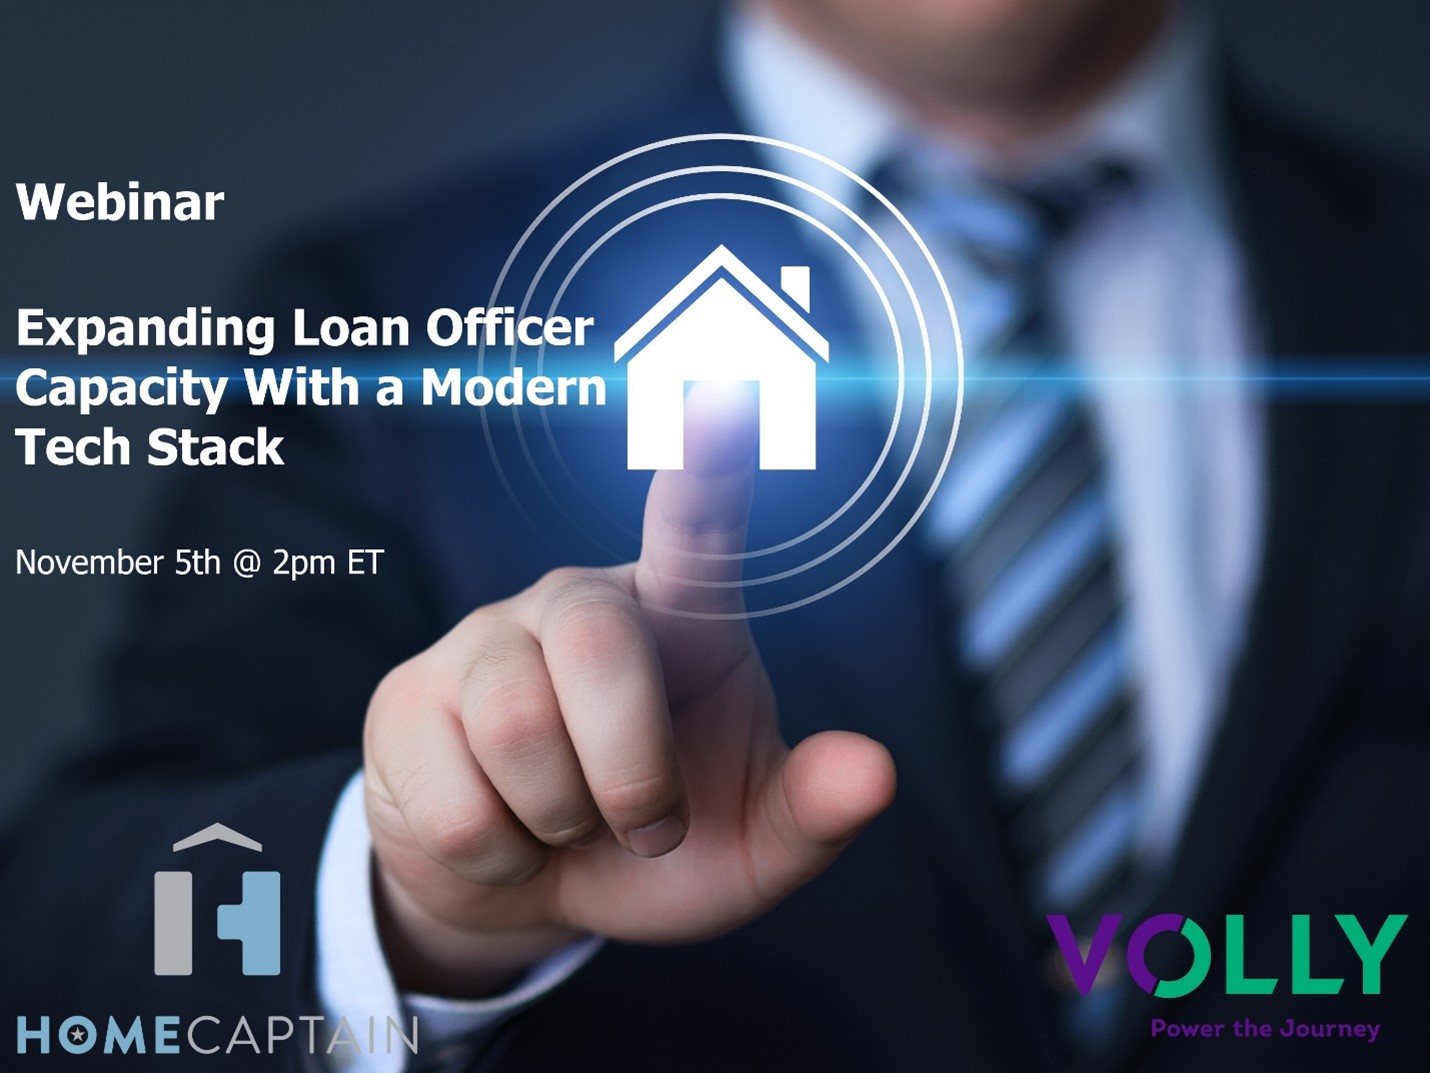 Volly Webinar With Home Captain